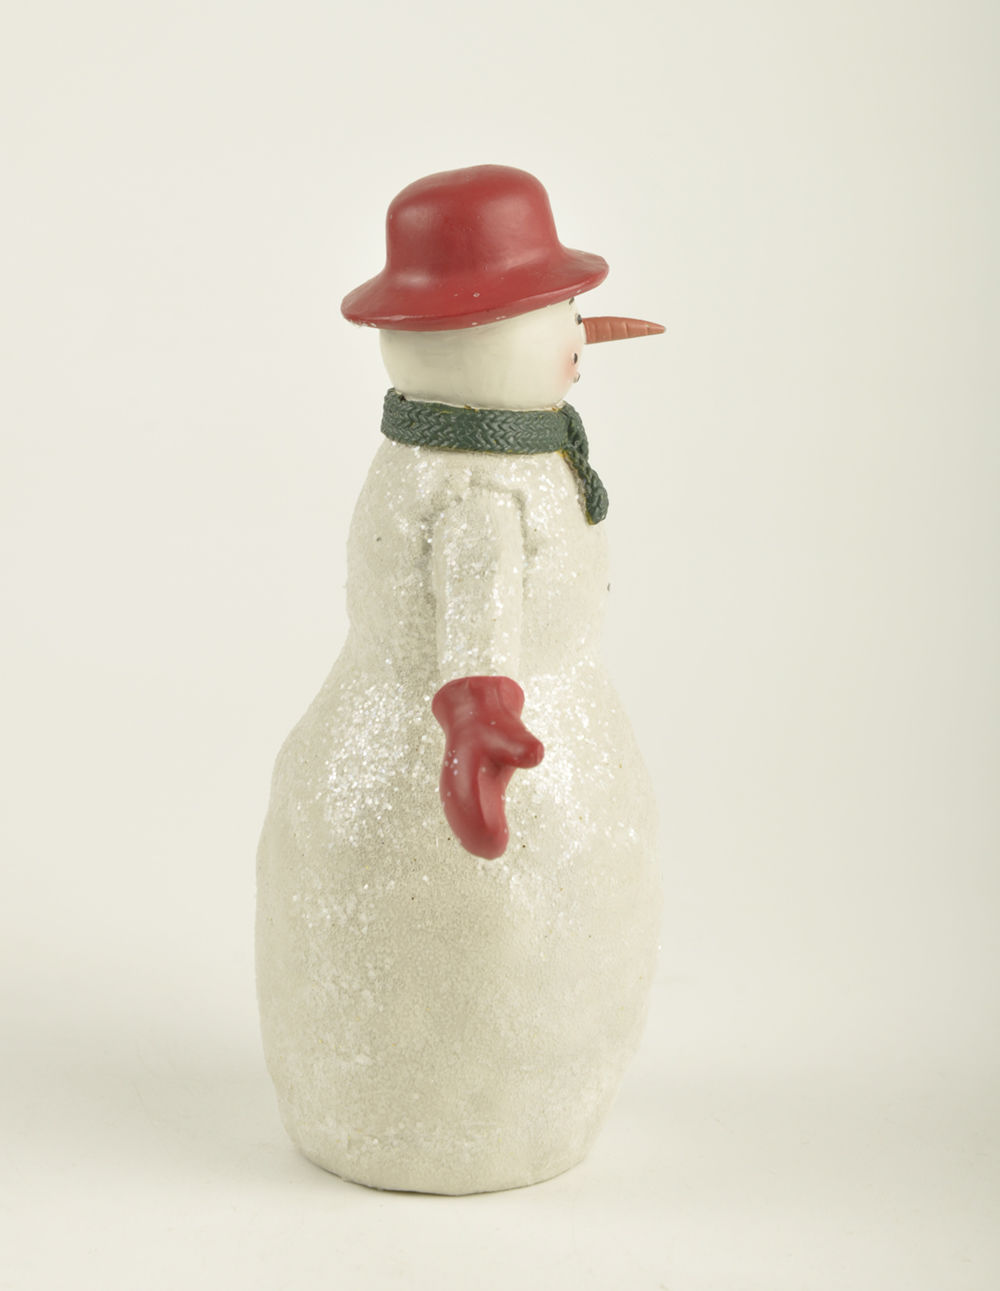 Snowman Mother Figurine Wearing Hat Christmas Snowman Statue For Winter Decoration